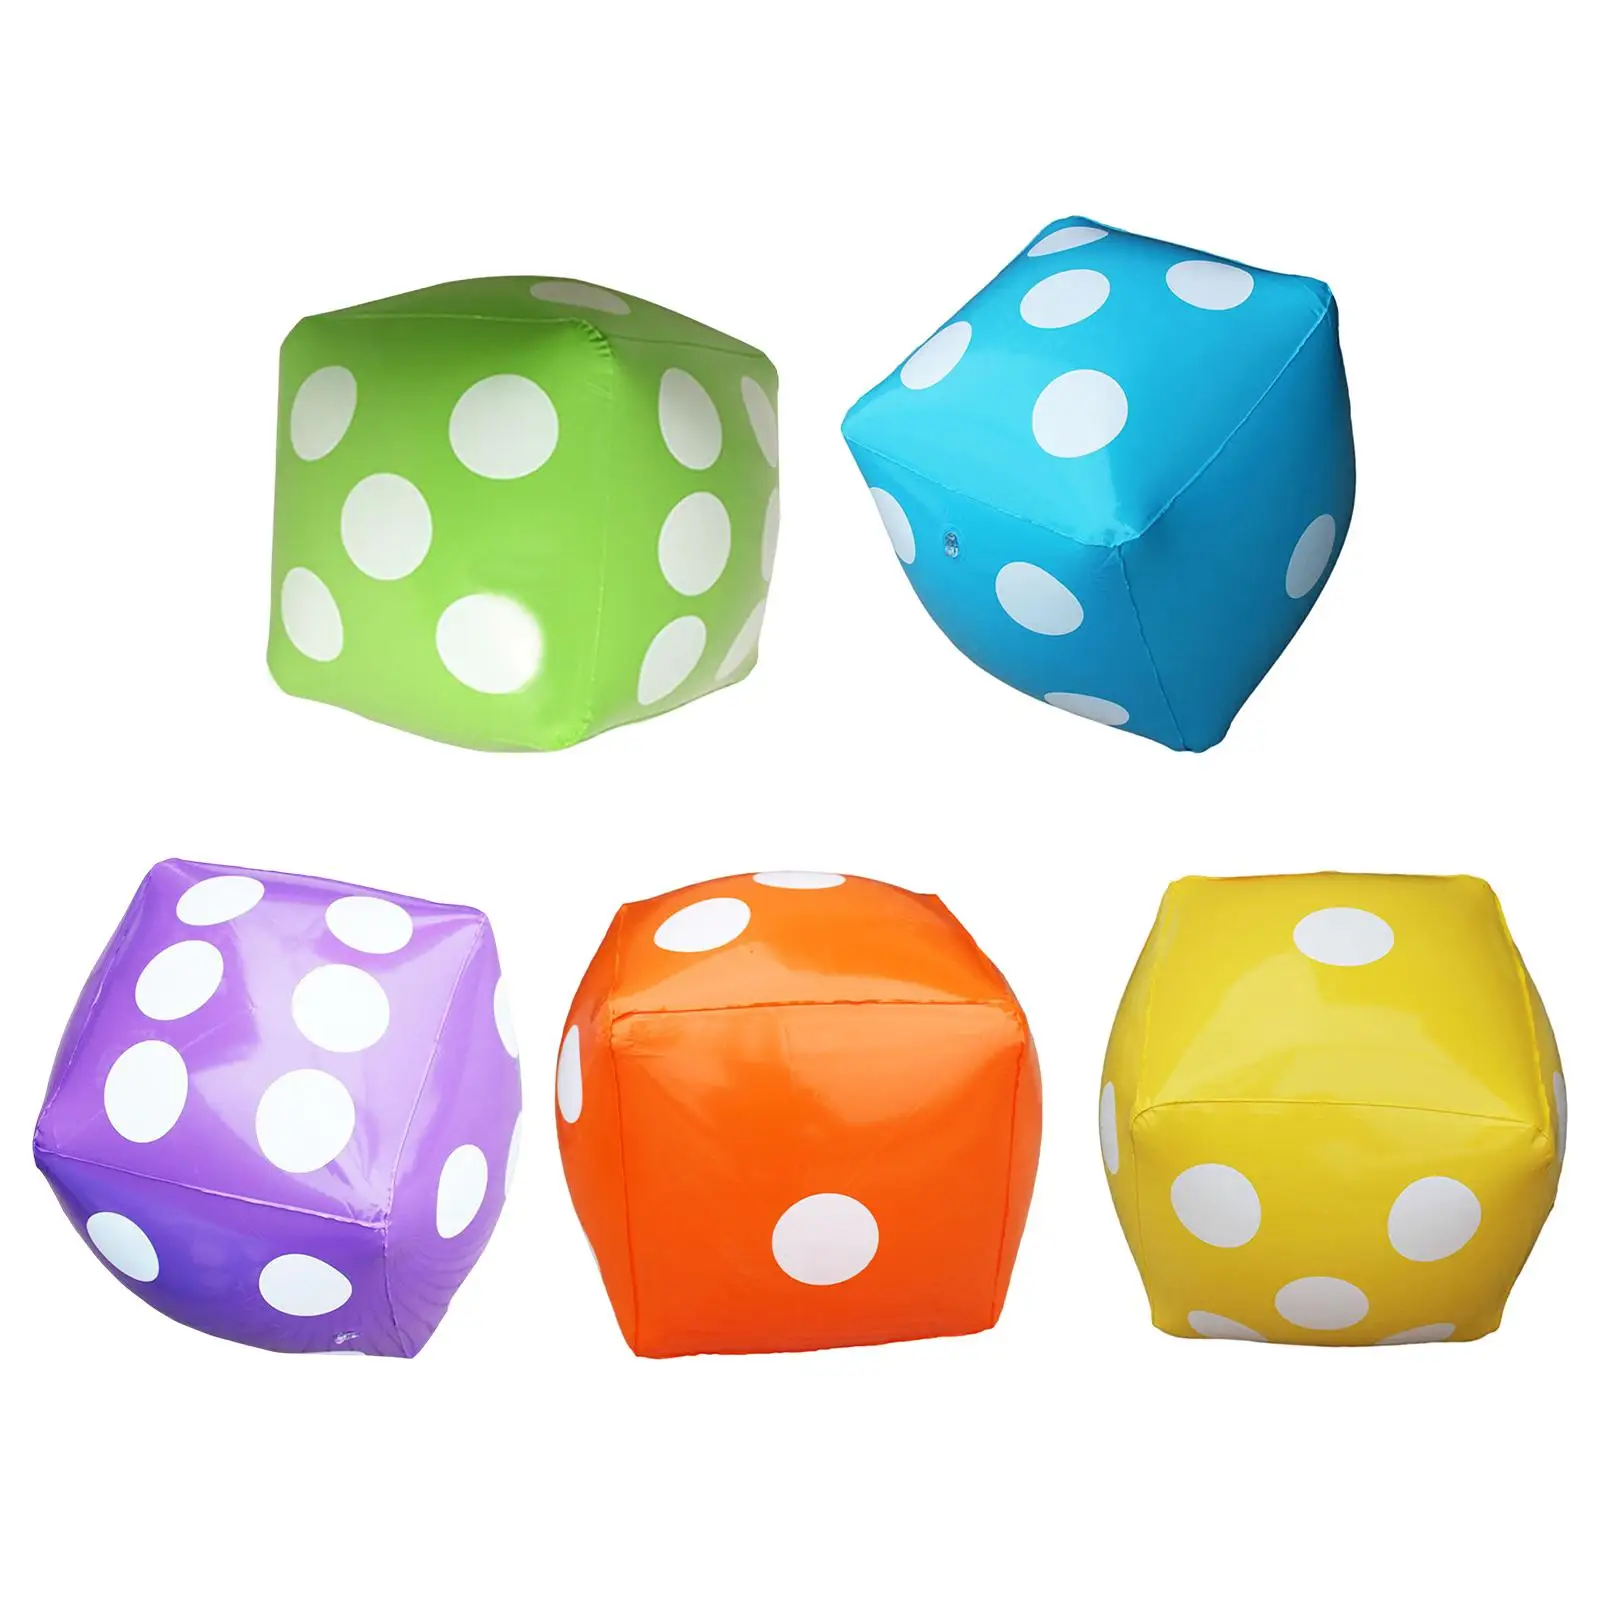 Inflatable Toys Dice Novelty Funny Decoration 23.62`` Cube Jumbo Inflatable Dice for Yard Indoor Outdoor Stage Props Home Pools